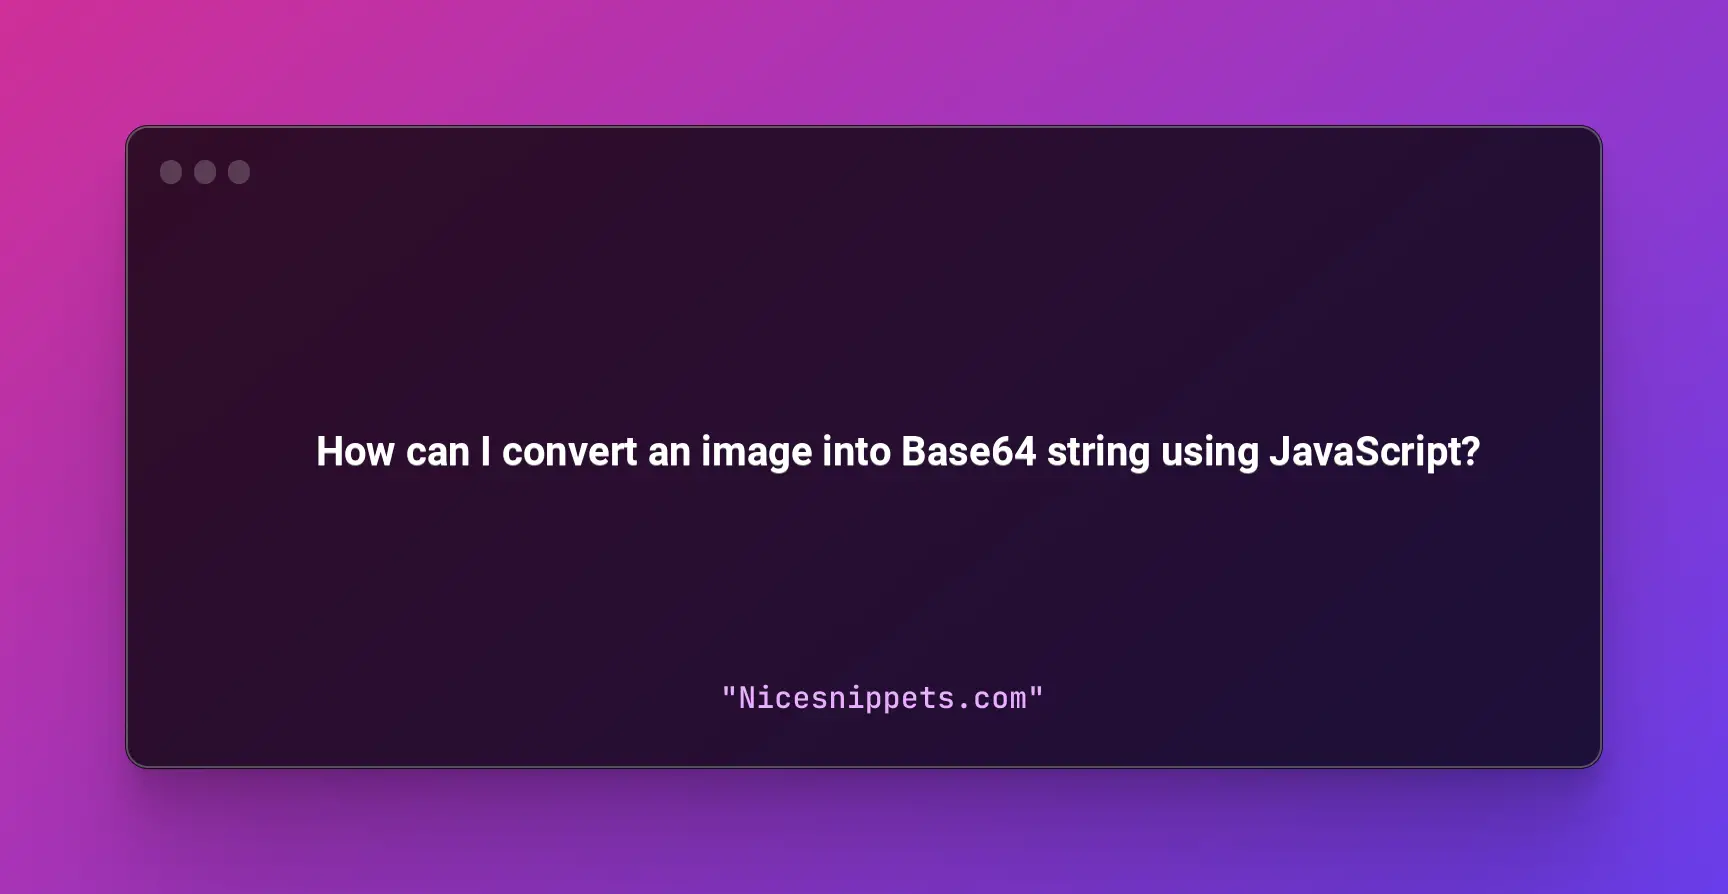 How can I convert an image into Base64 string using JavaScript?